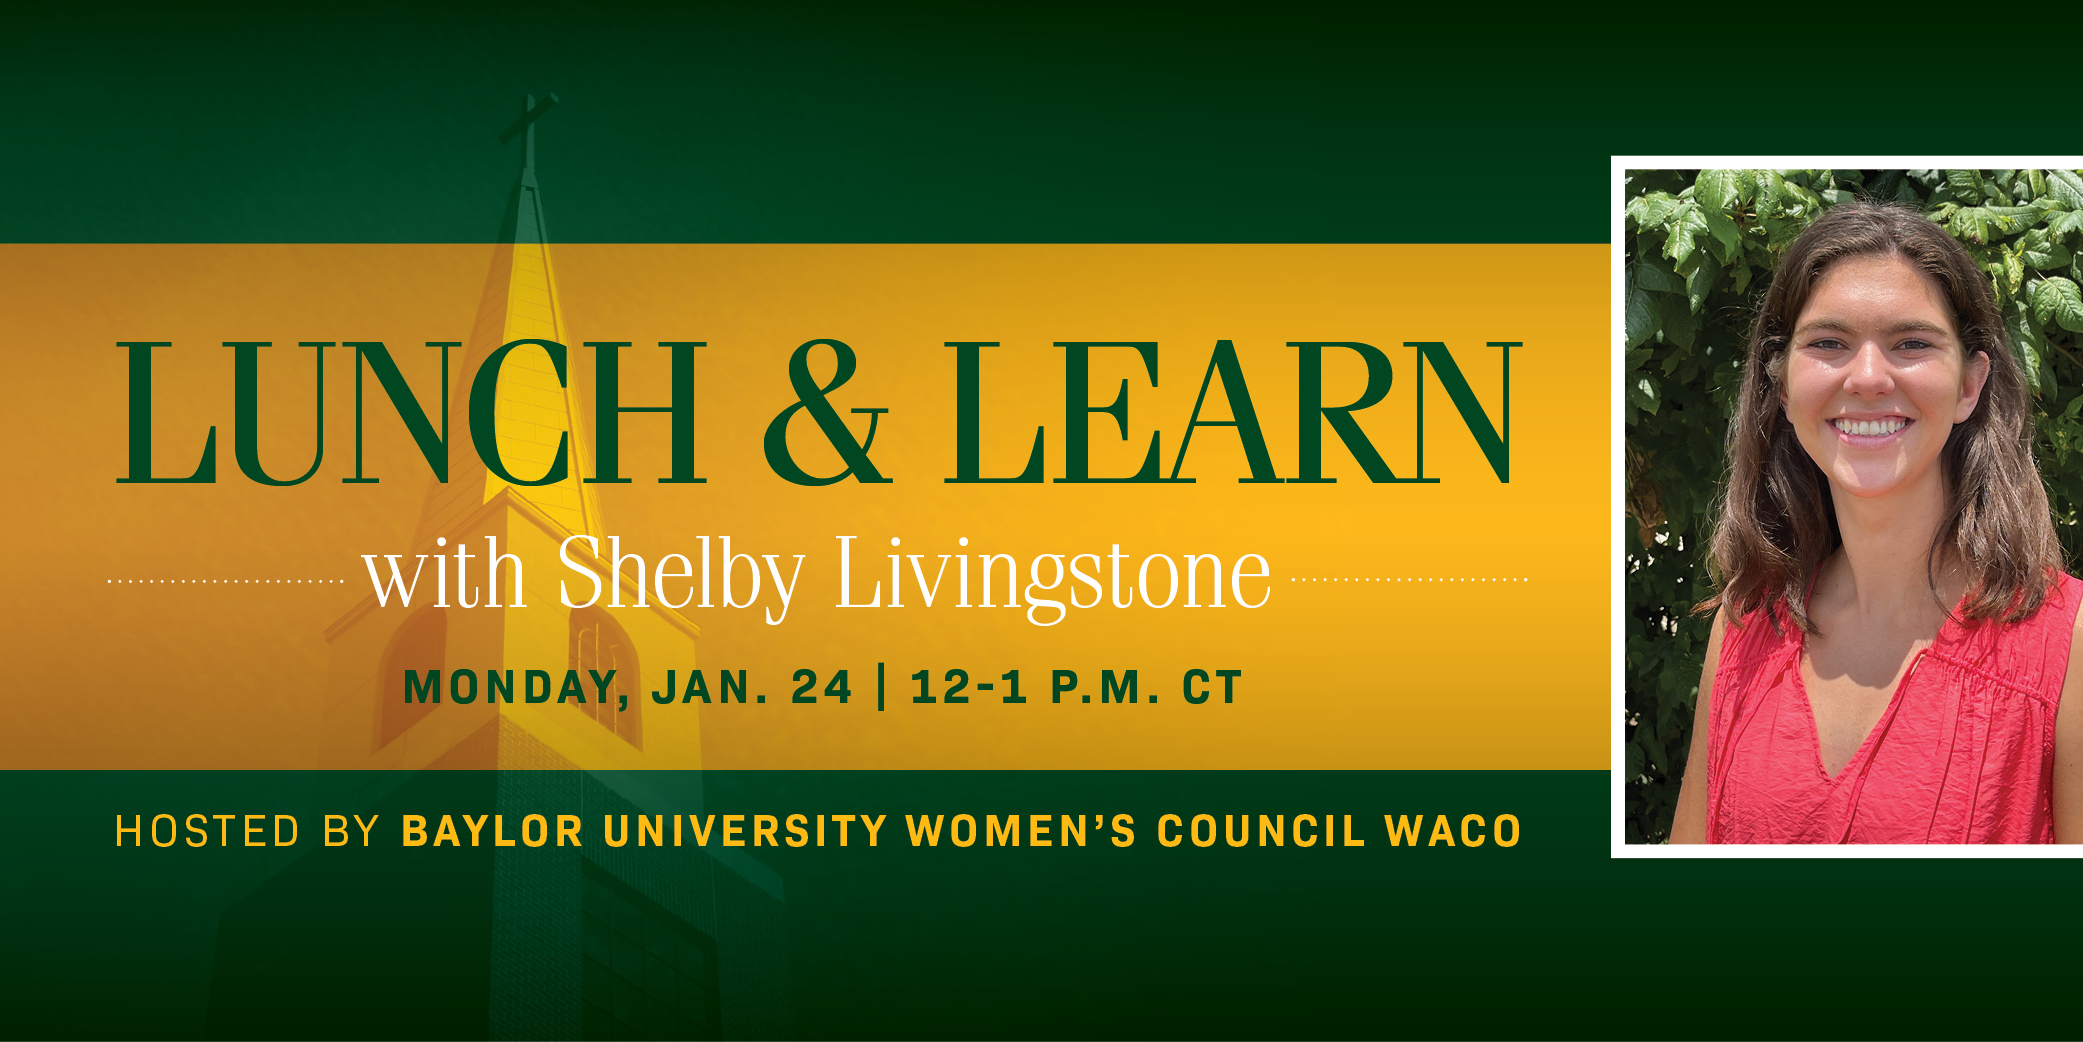 Lunch & Learn with Shelby Livingstone, Hosted by Baylor University Women's Council Waco